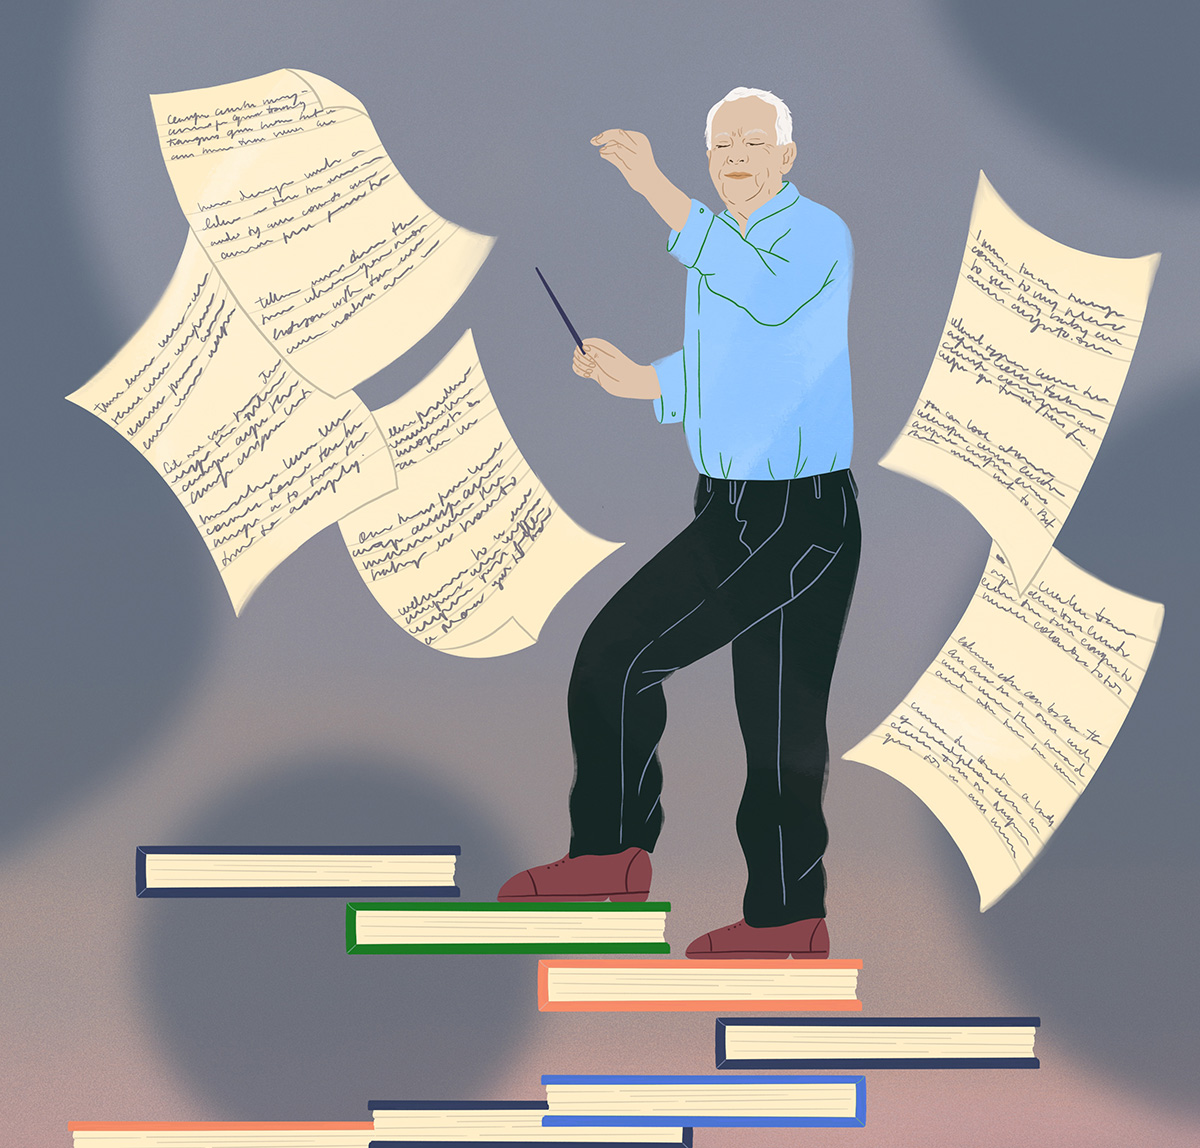 An illustration of a man conducting while standing on a stack of books and sheet music swirling about him